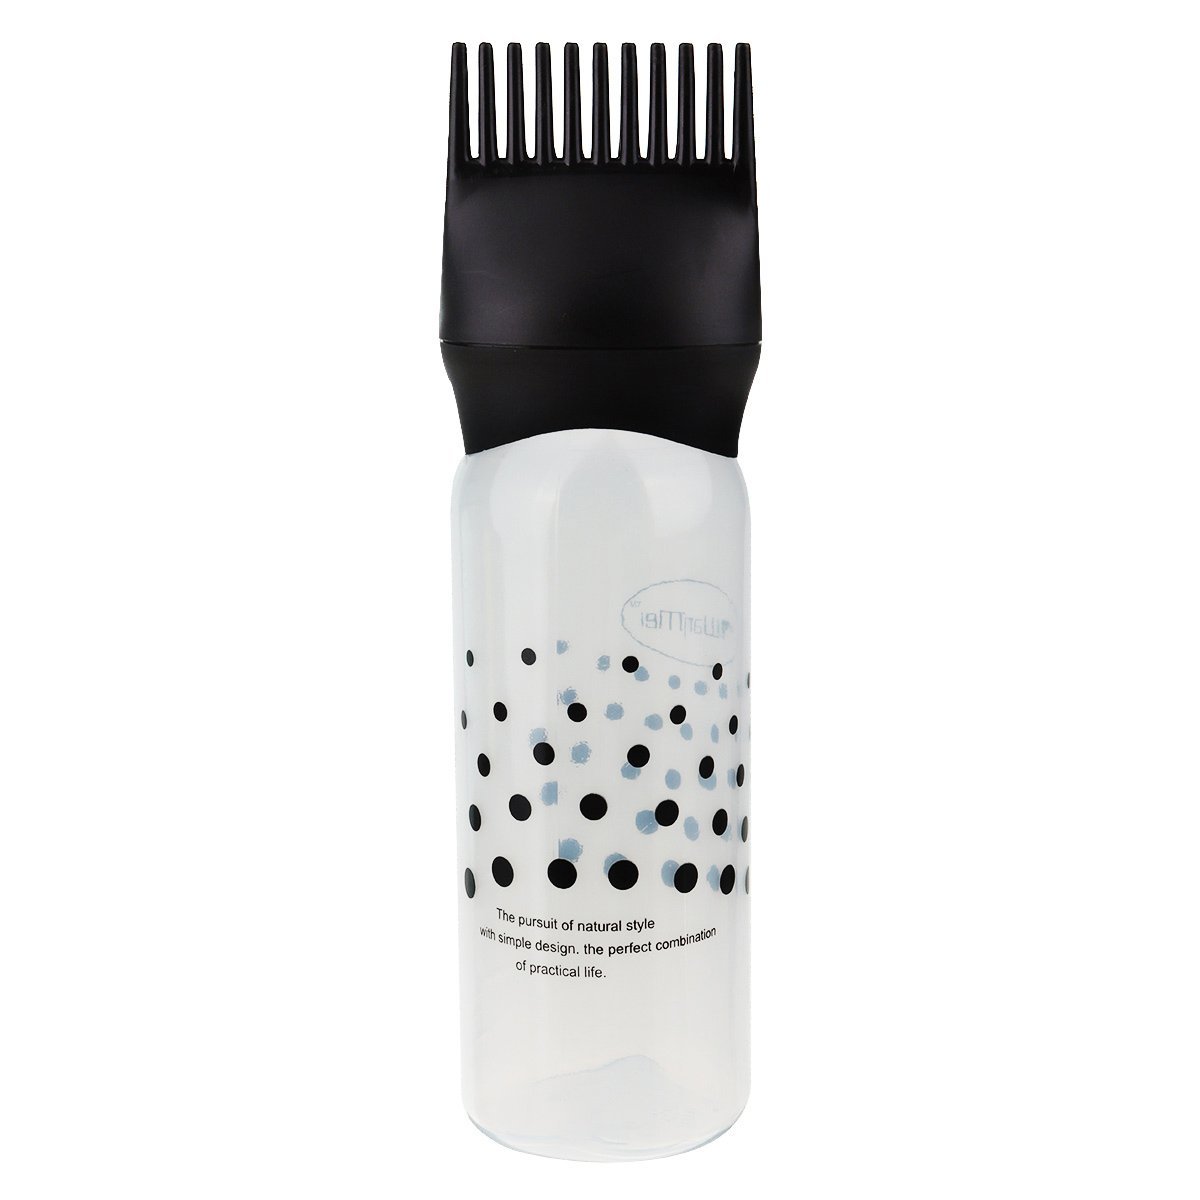 Conditioning Oil Root applicator Bottle - SashBeauty